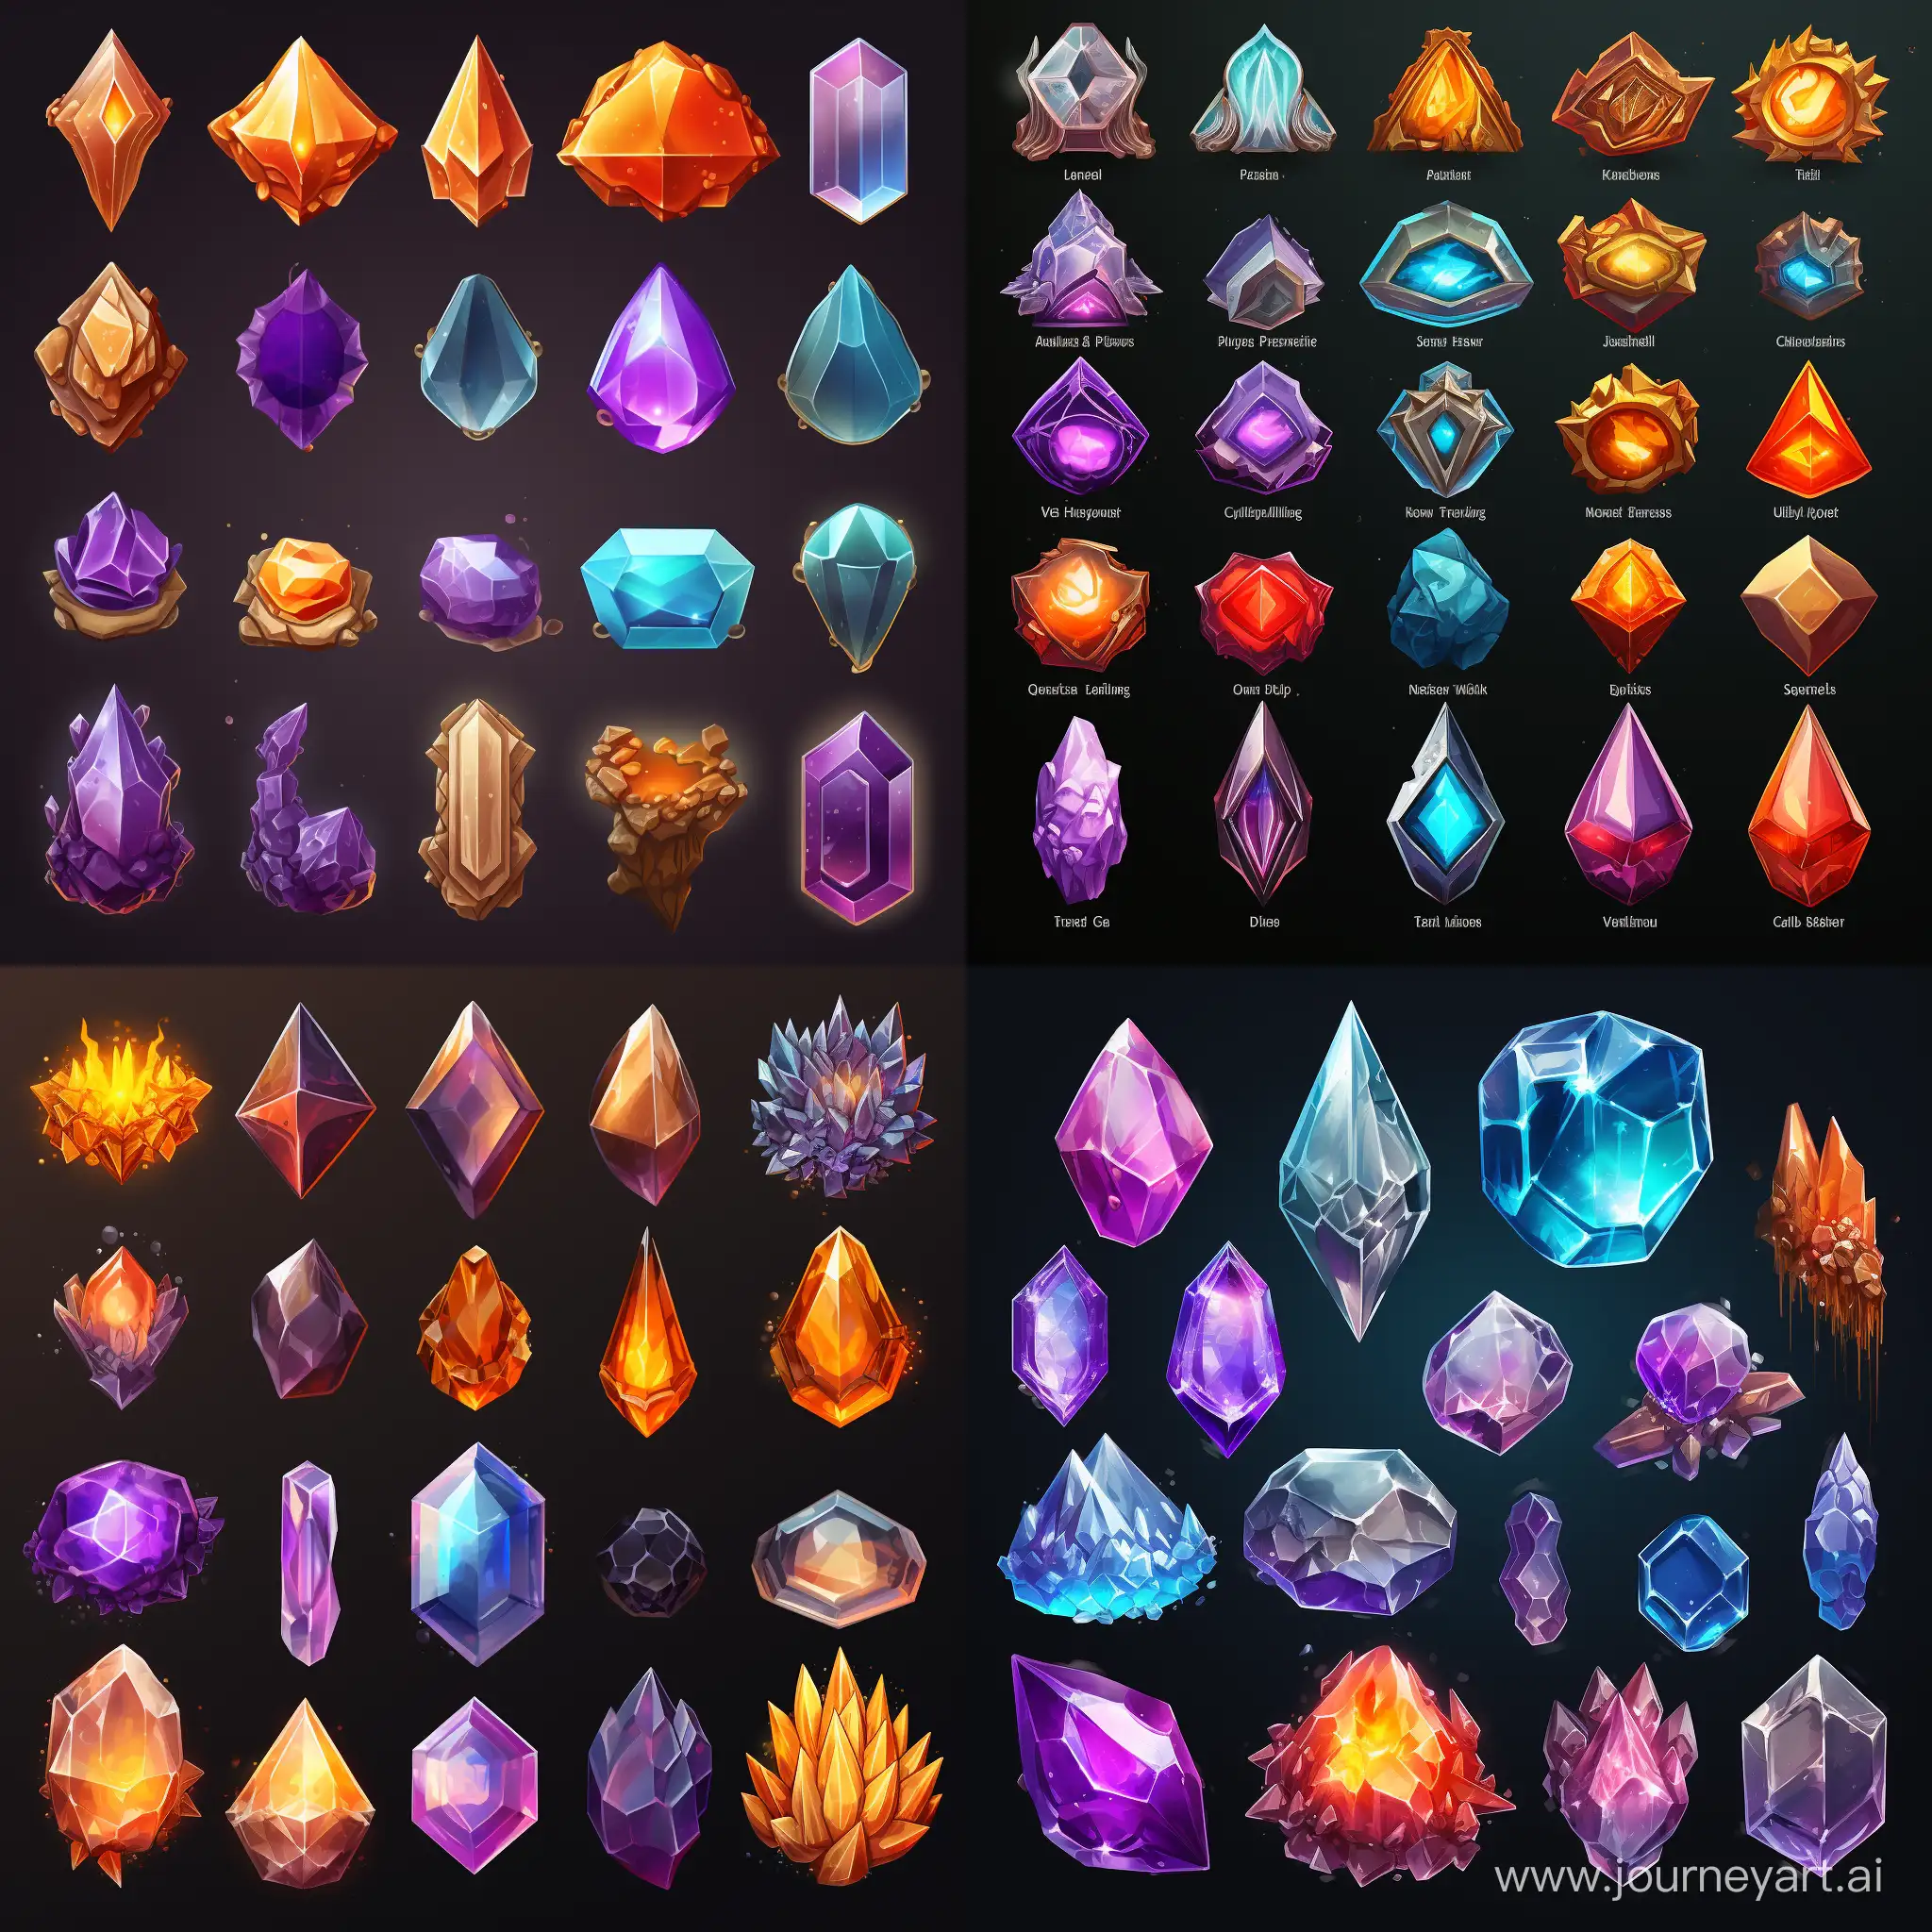 Fantasy-Item-Spritesheet-with-Crystal-Tools-and-Magical-Effects